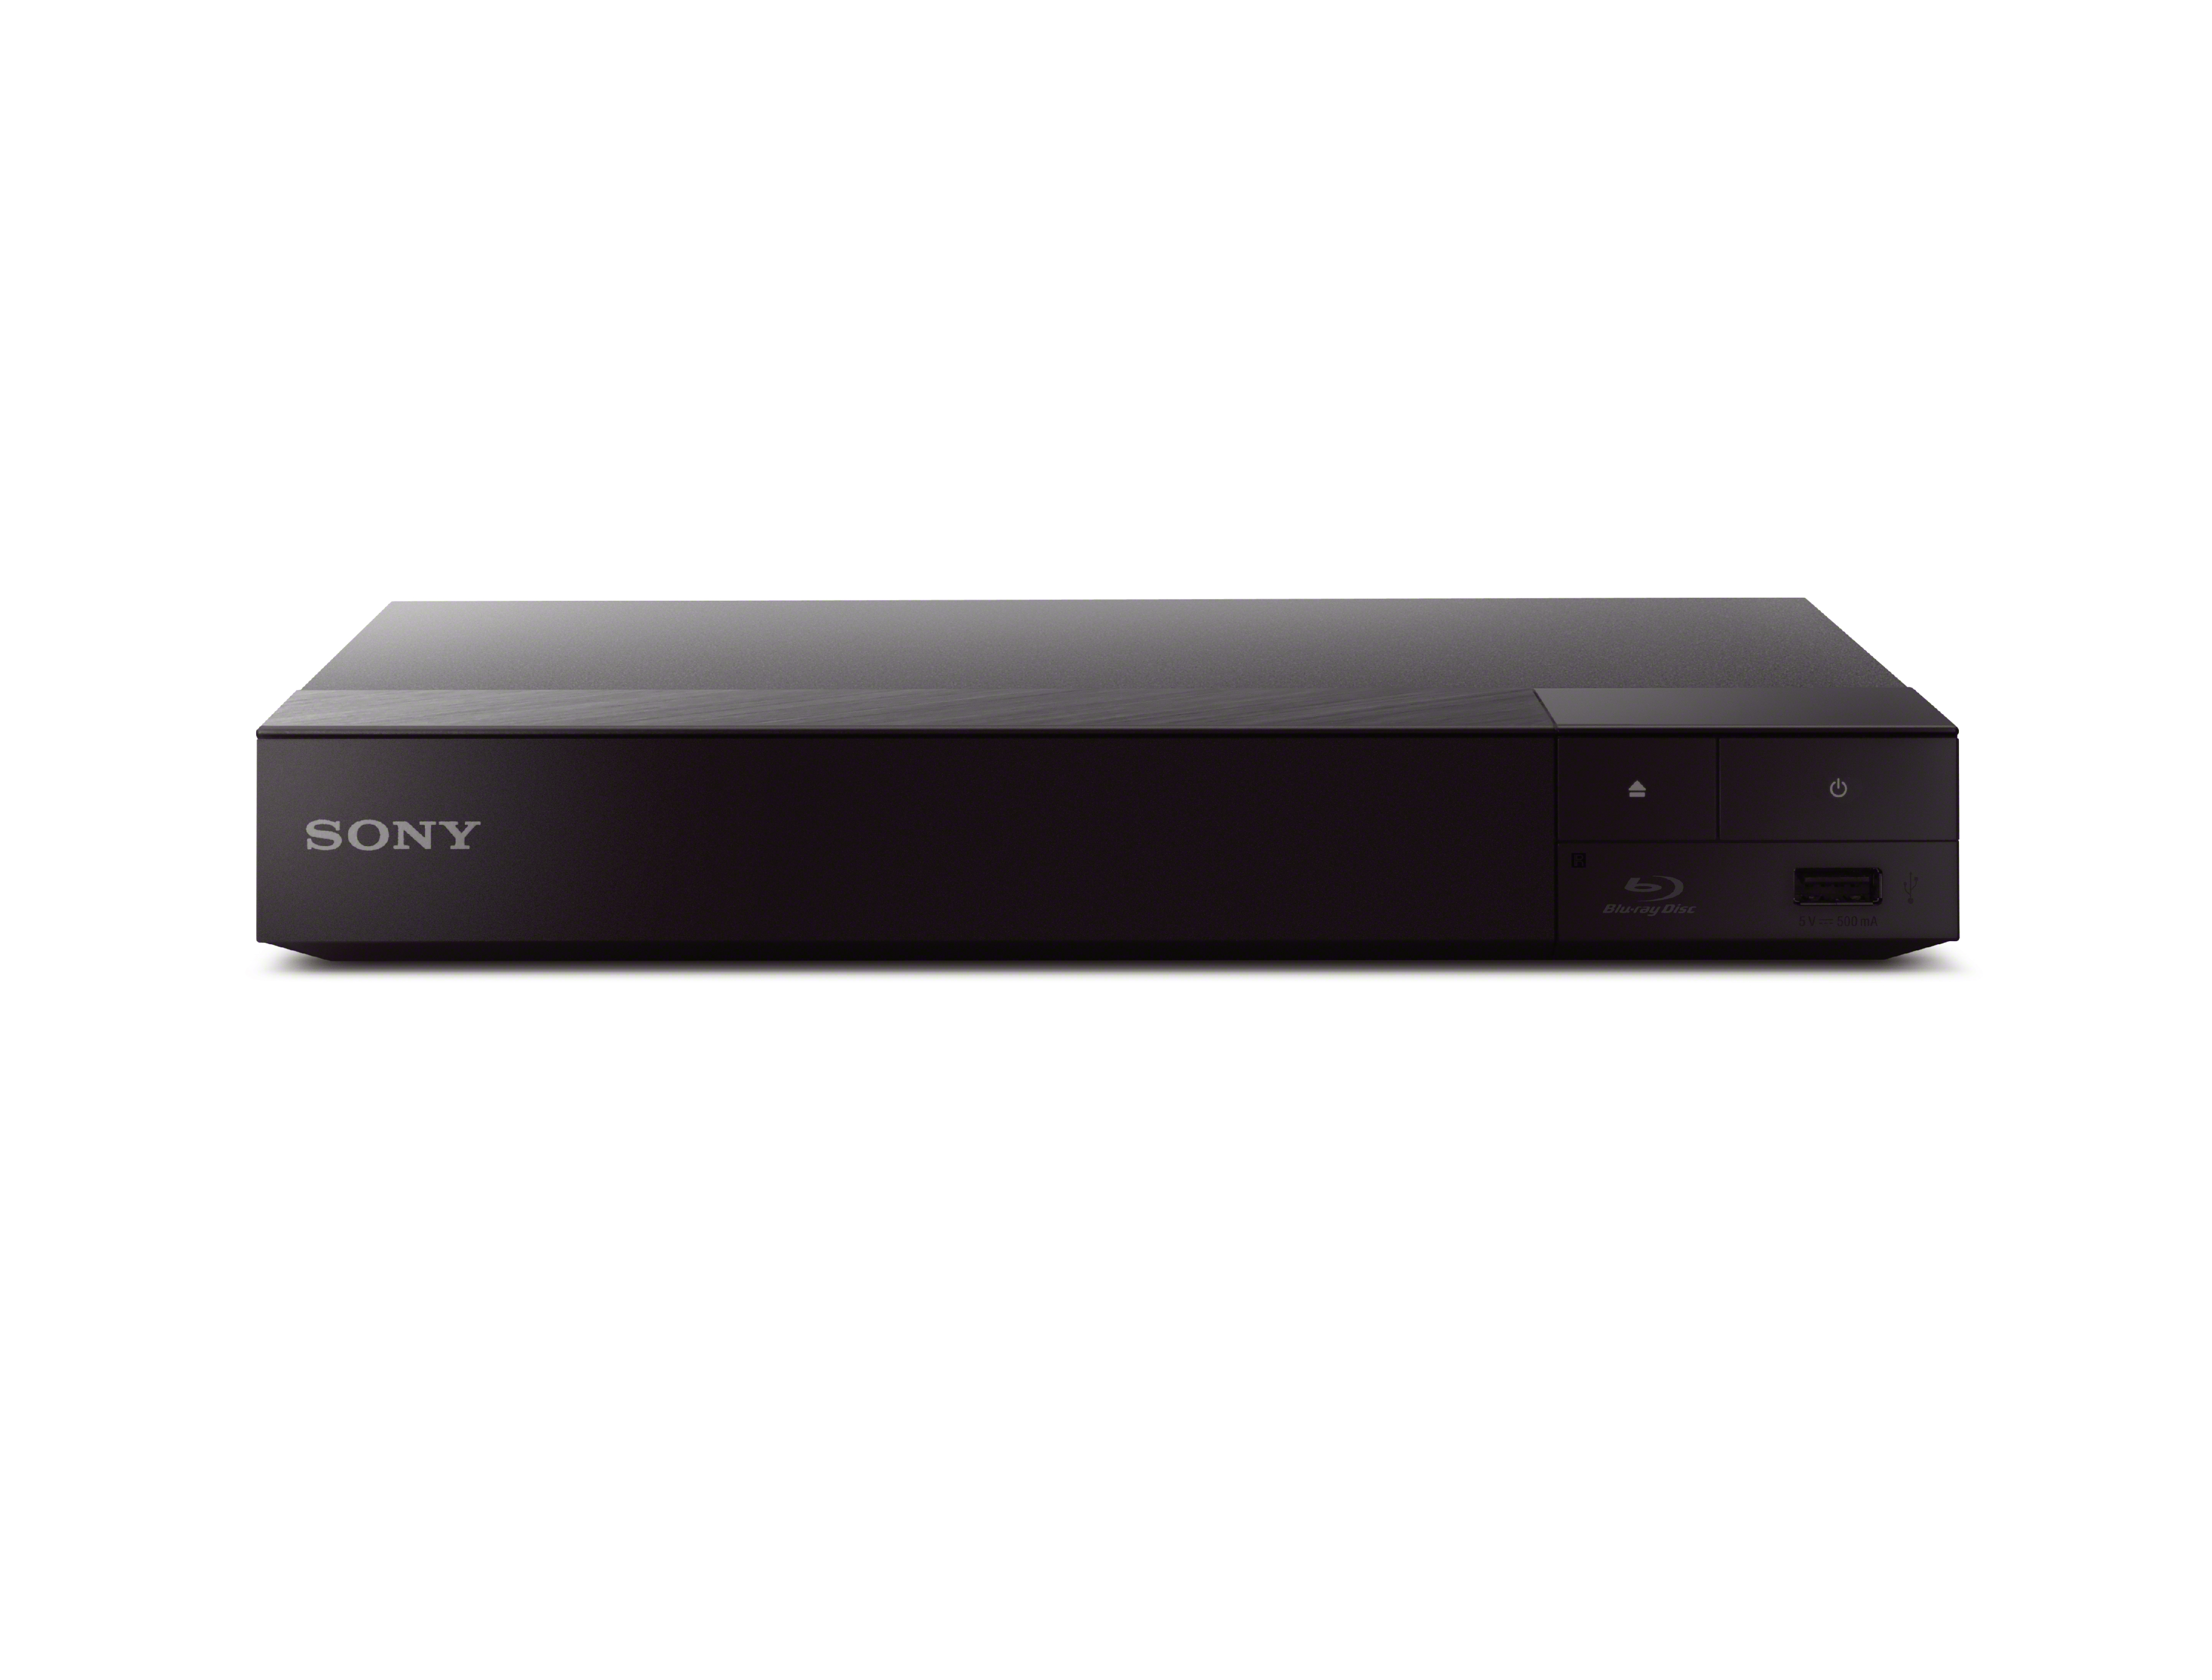 Sony BDP-S6700 4K Upscaling 3D Home Theater Streaming Blu-Ray DVD Player with Wi-Fi, Dolby Digital TrueHD/DTS, and upscaling - image 1 of 10